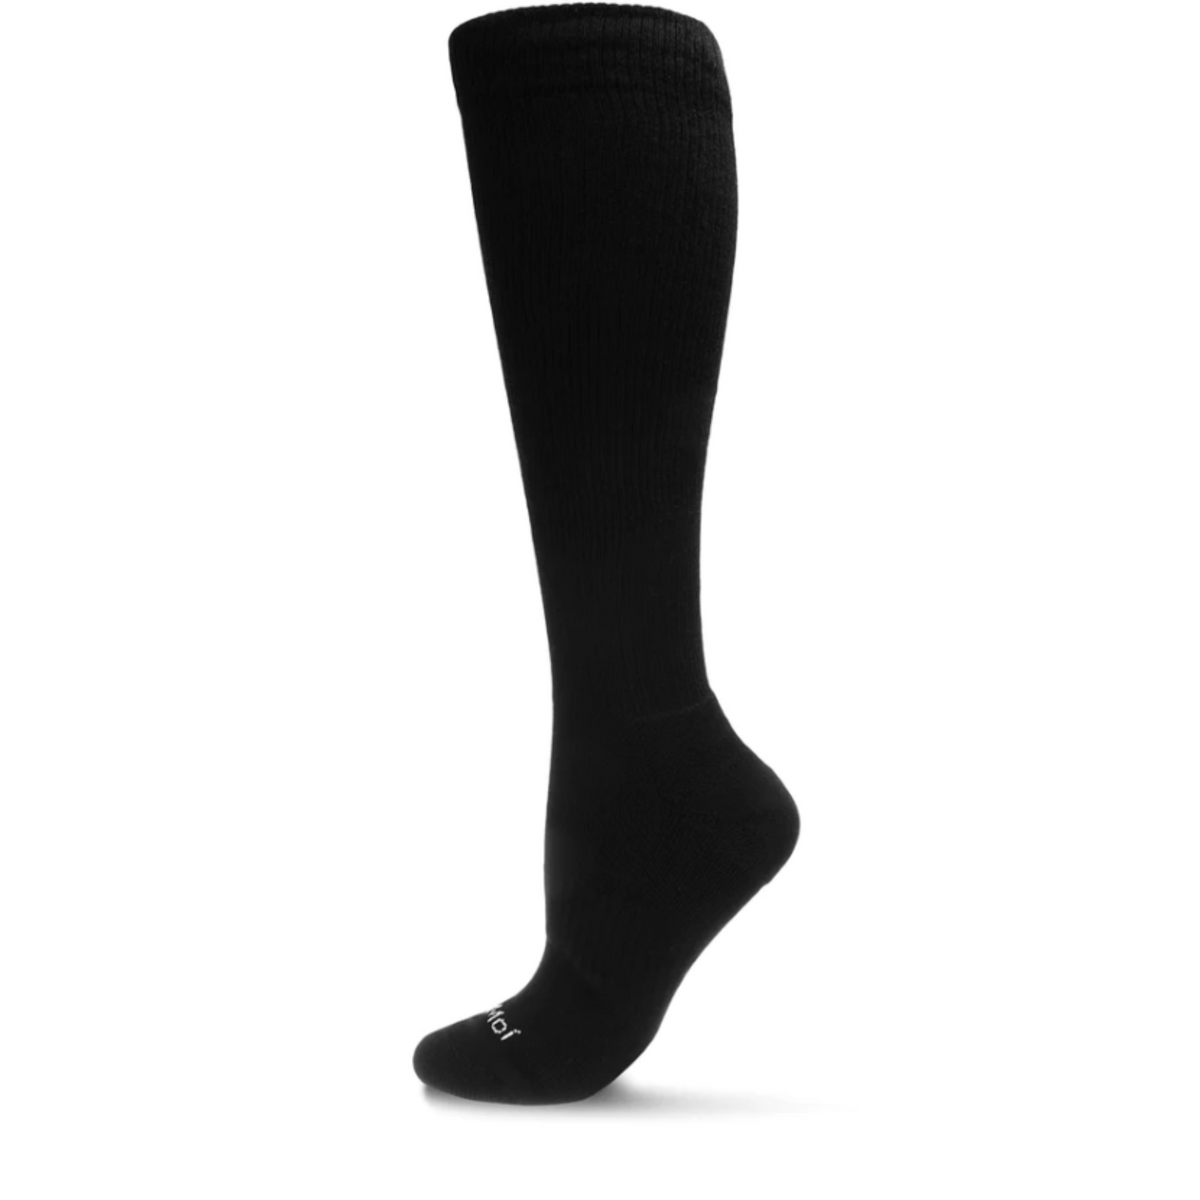 MeMoi Classic Athletic Cushion Sole Cotton Moderate Graduated Compression in black from side